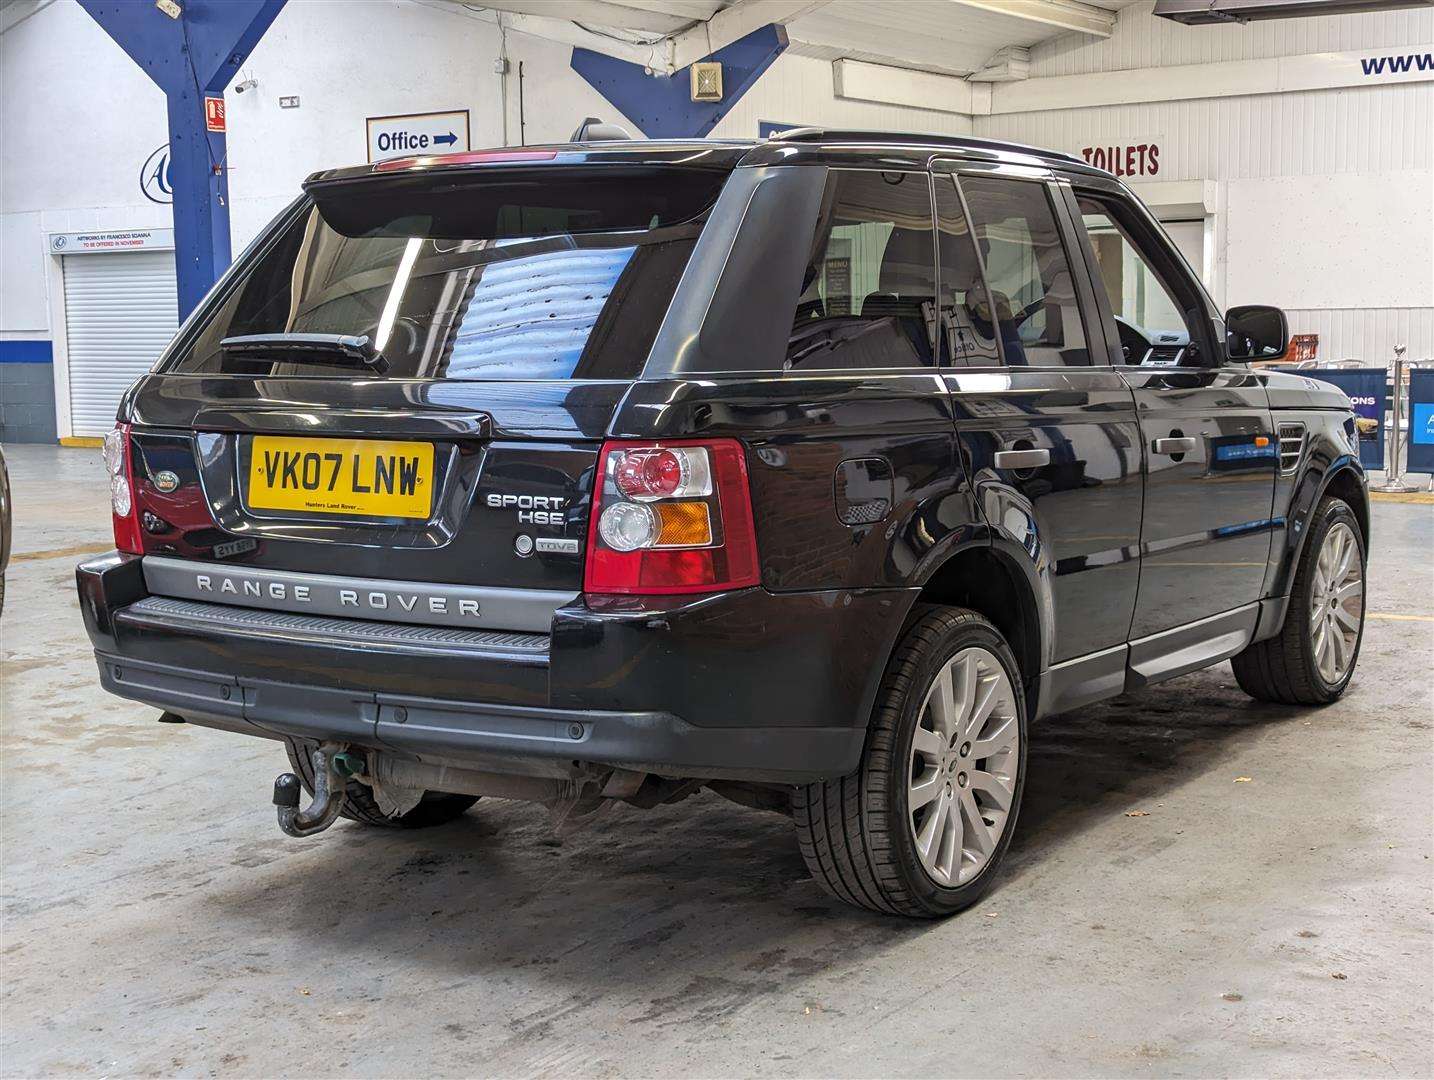 2007 LAND ROVER RANGE ROVER SP HSE TDV8 AUTO - Image 8 of 30